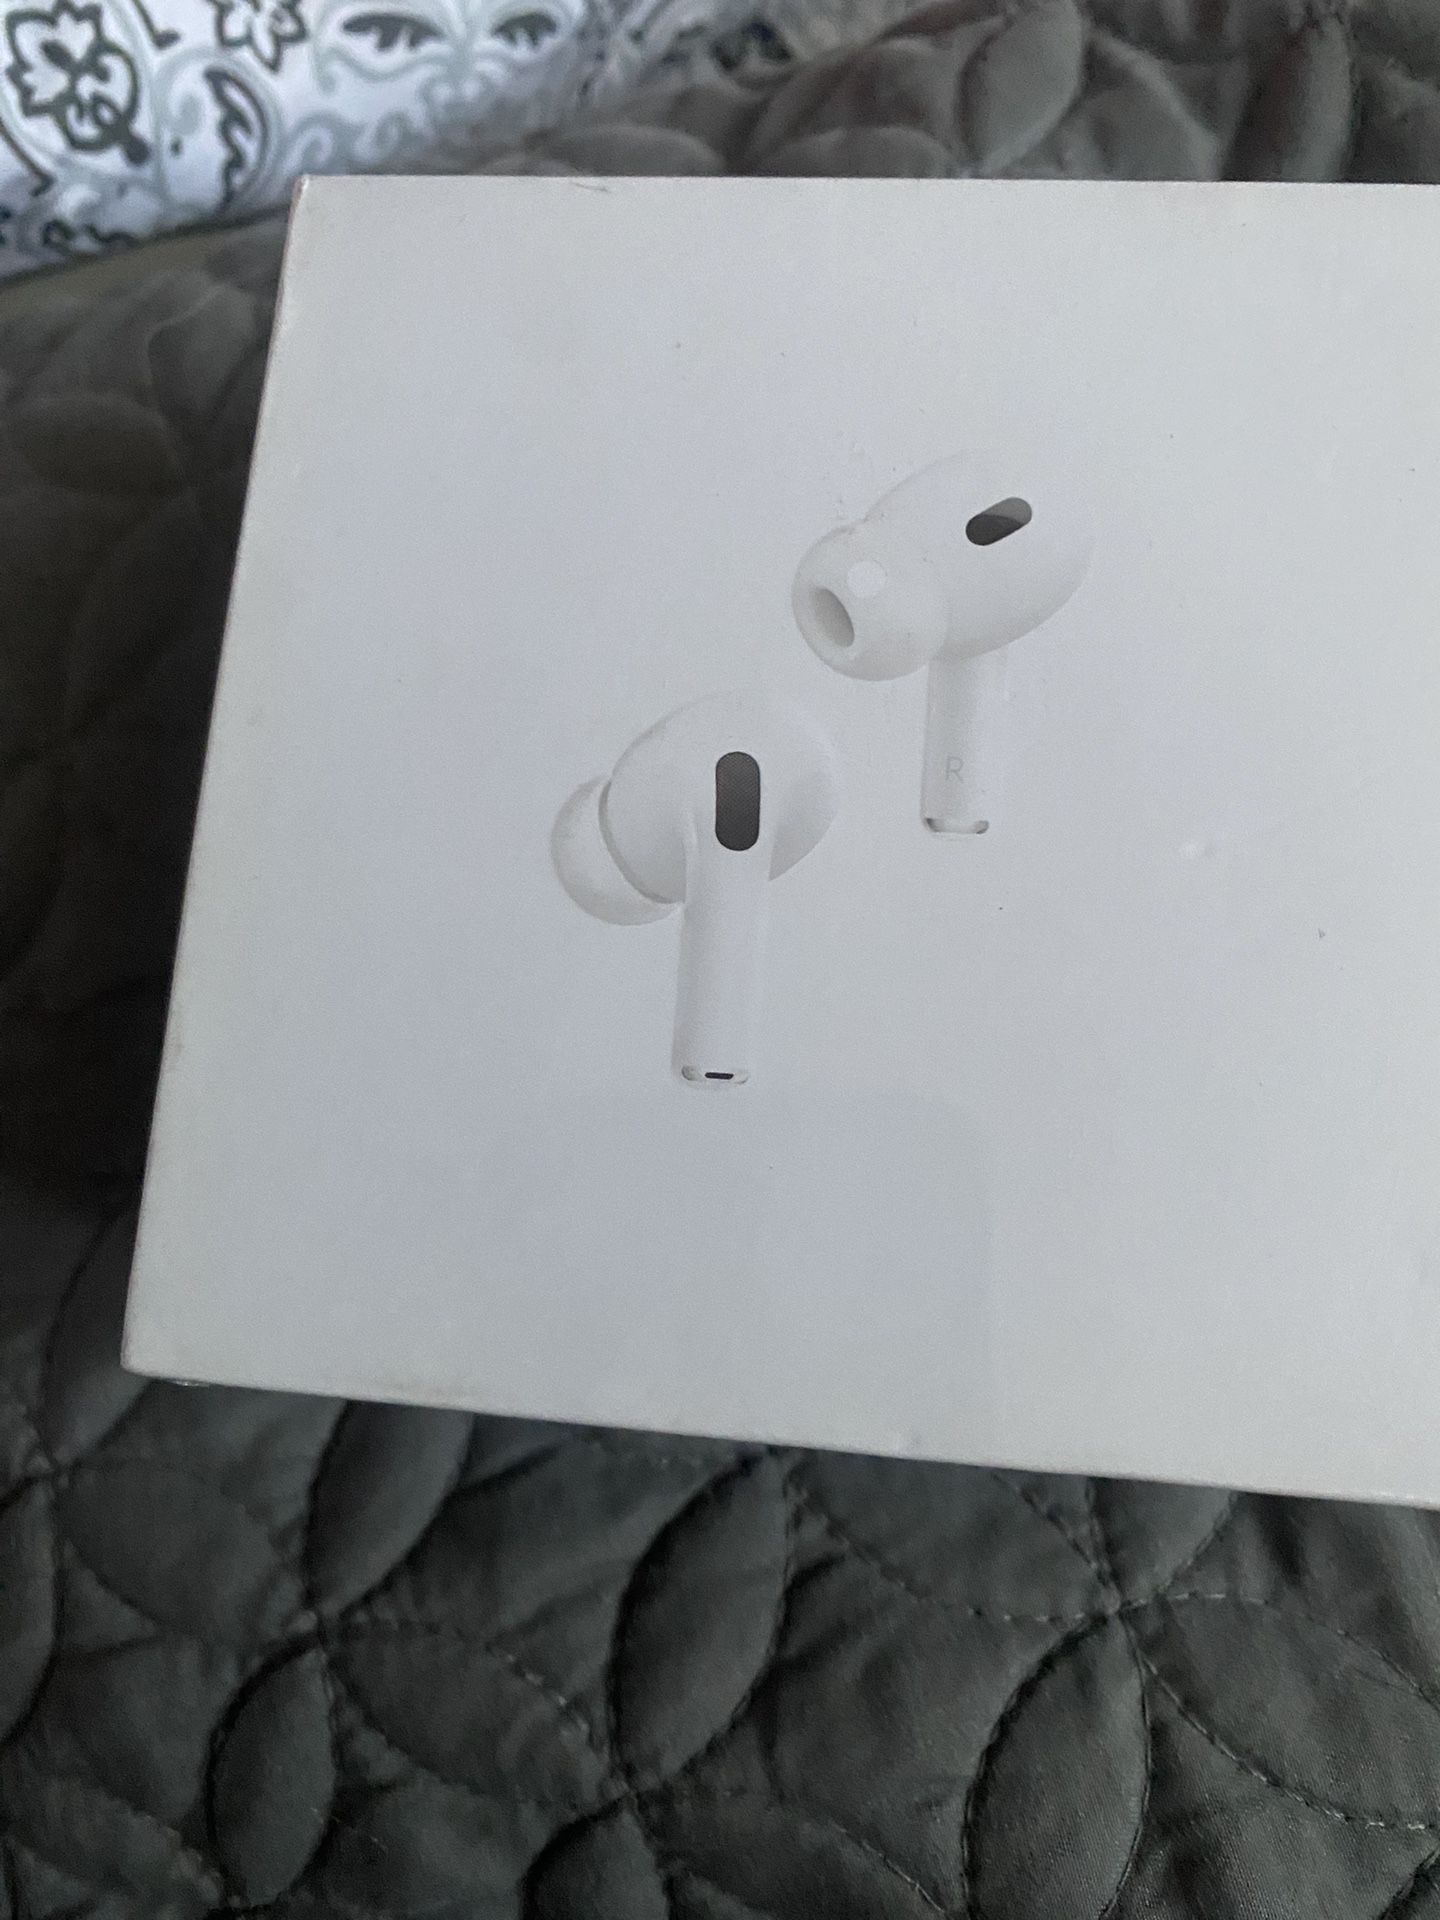 Brand New 2nd Generation AirPods Pro